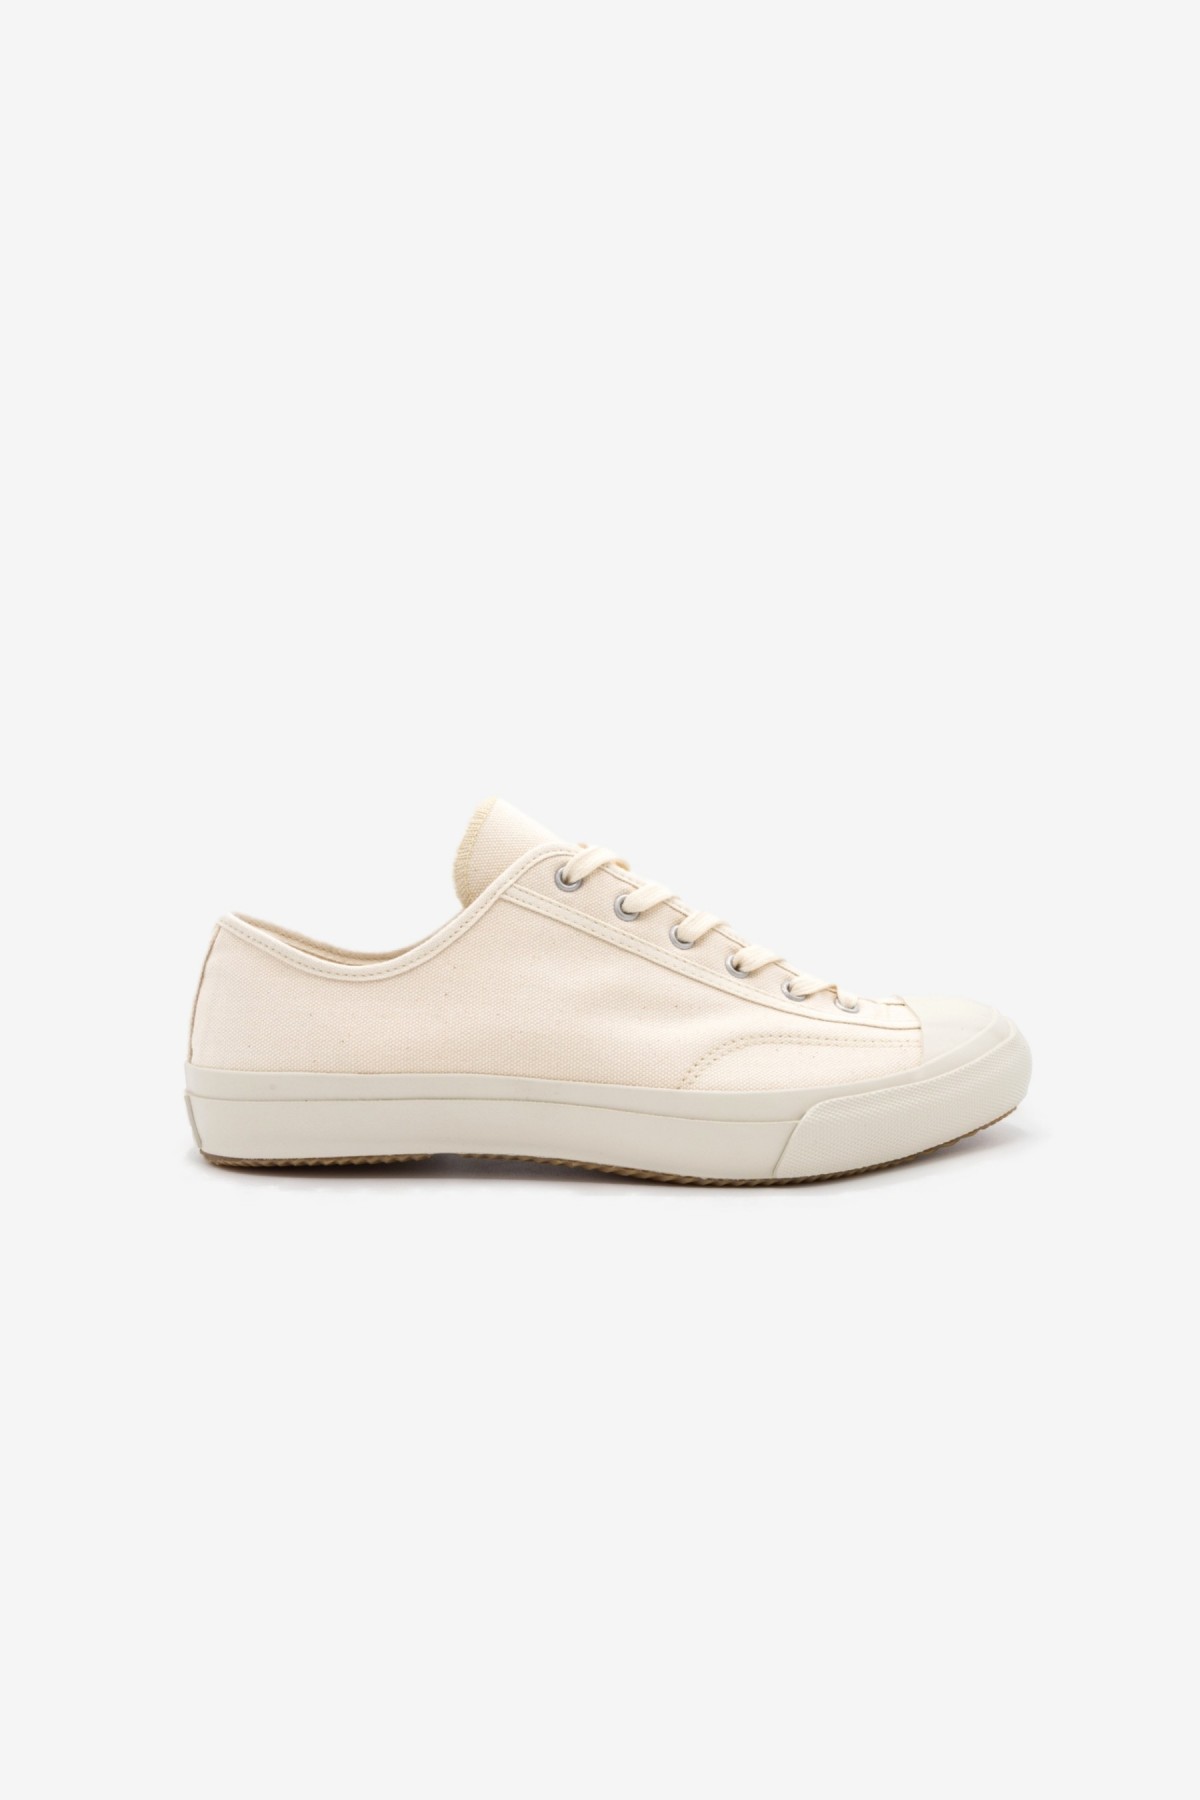 Moonstar Gym Classic in White